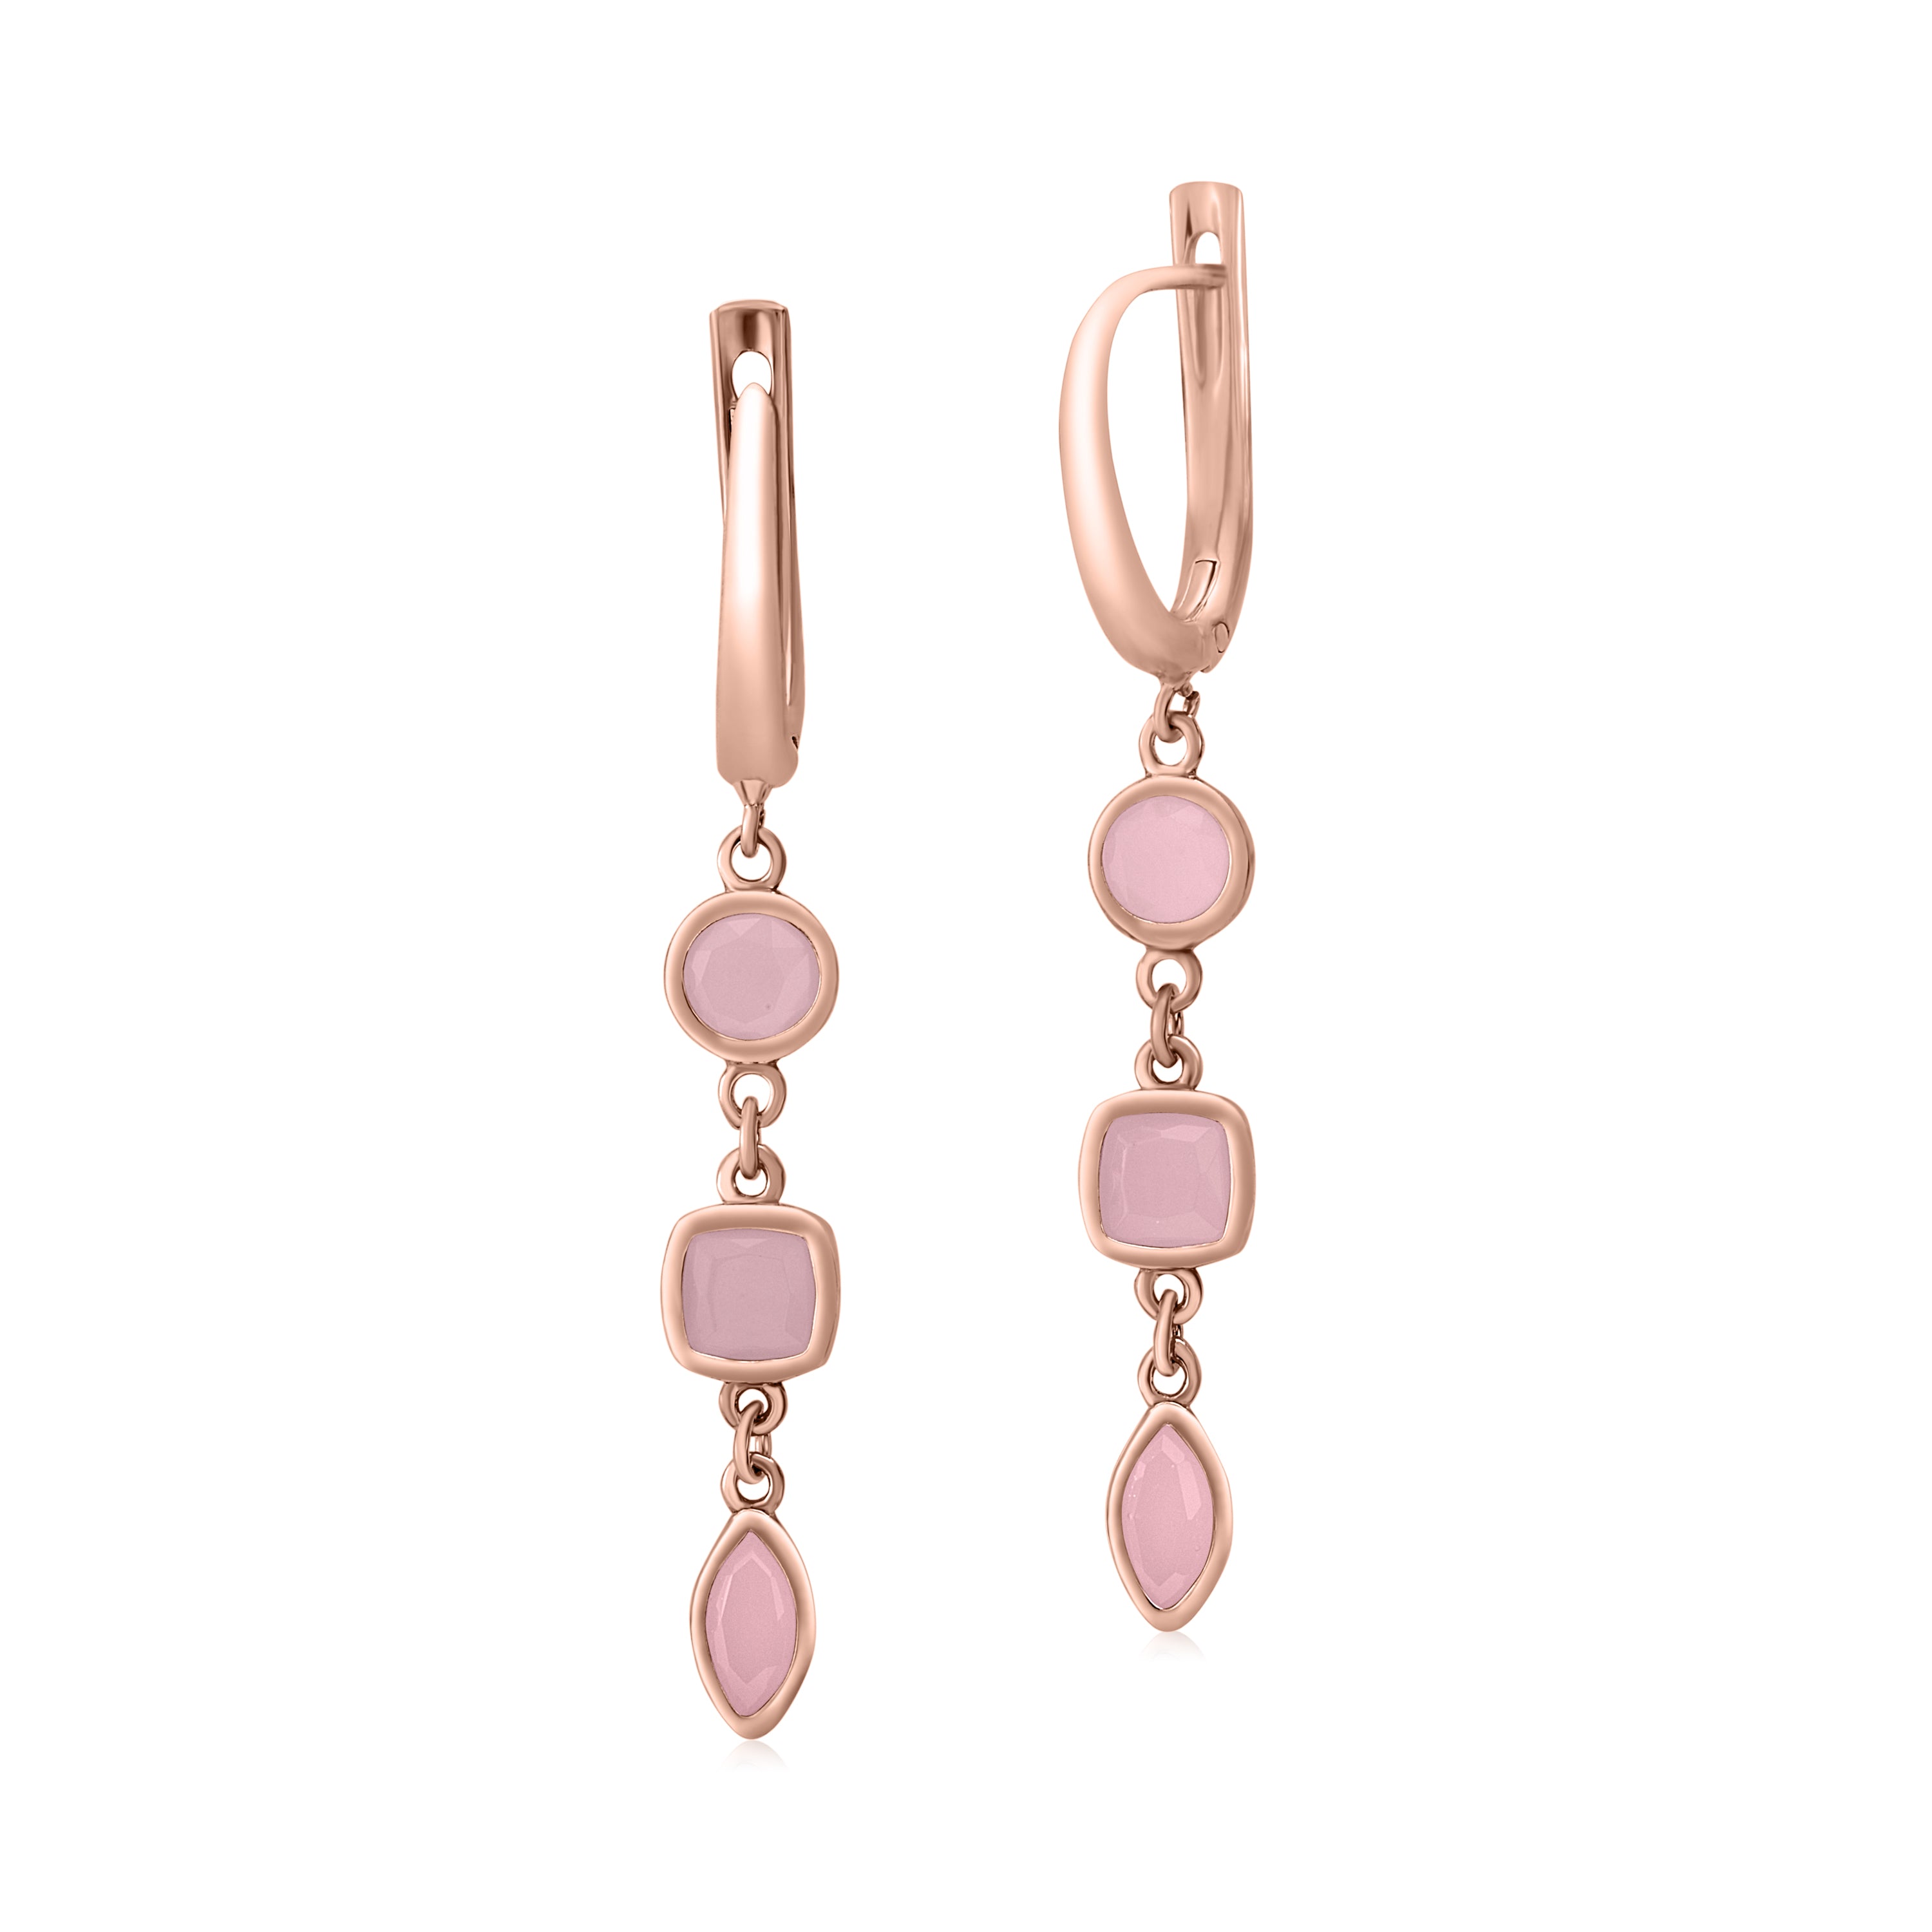 UNICORNJ Sterling Silver Rose Gold Plated Leverback Earrings 3 Tier Dangle with Simulated Stones